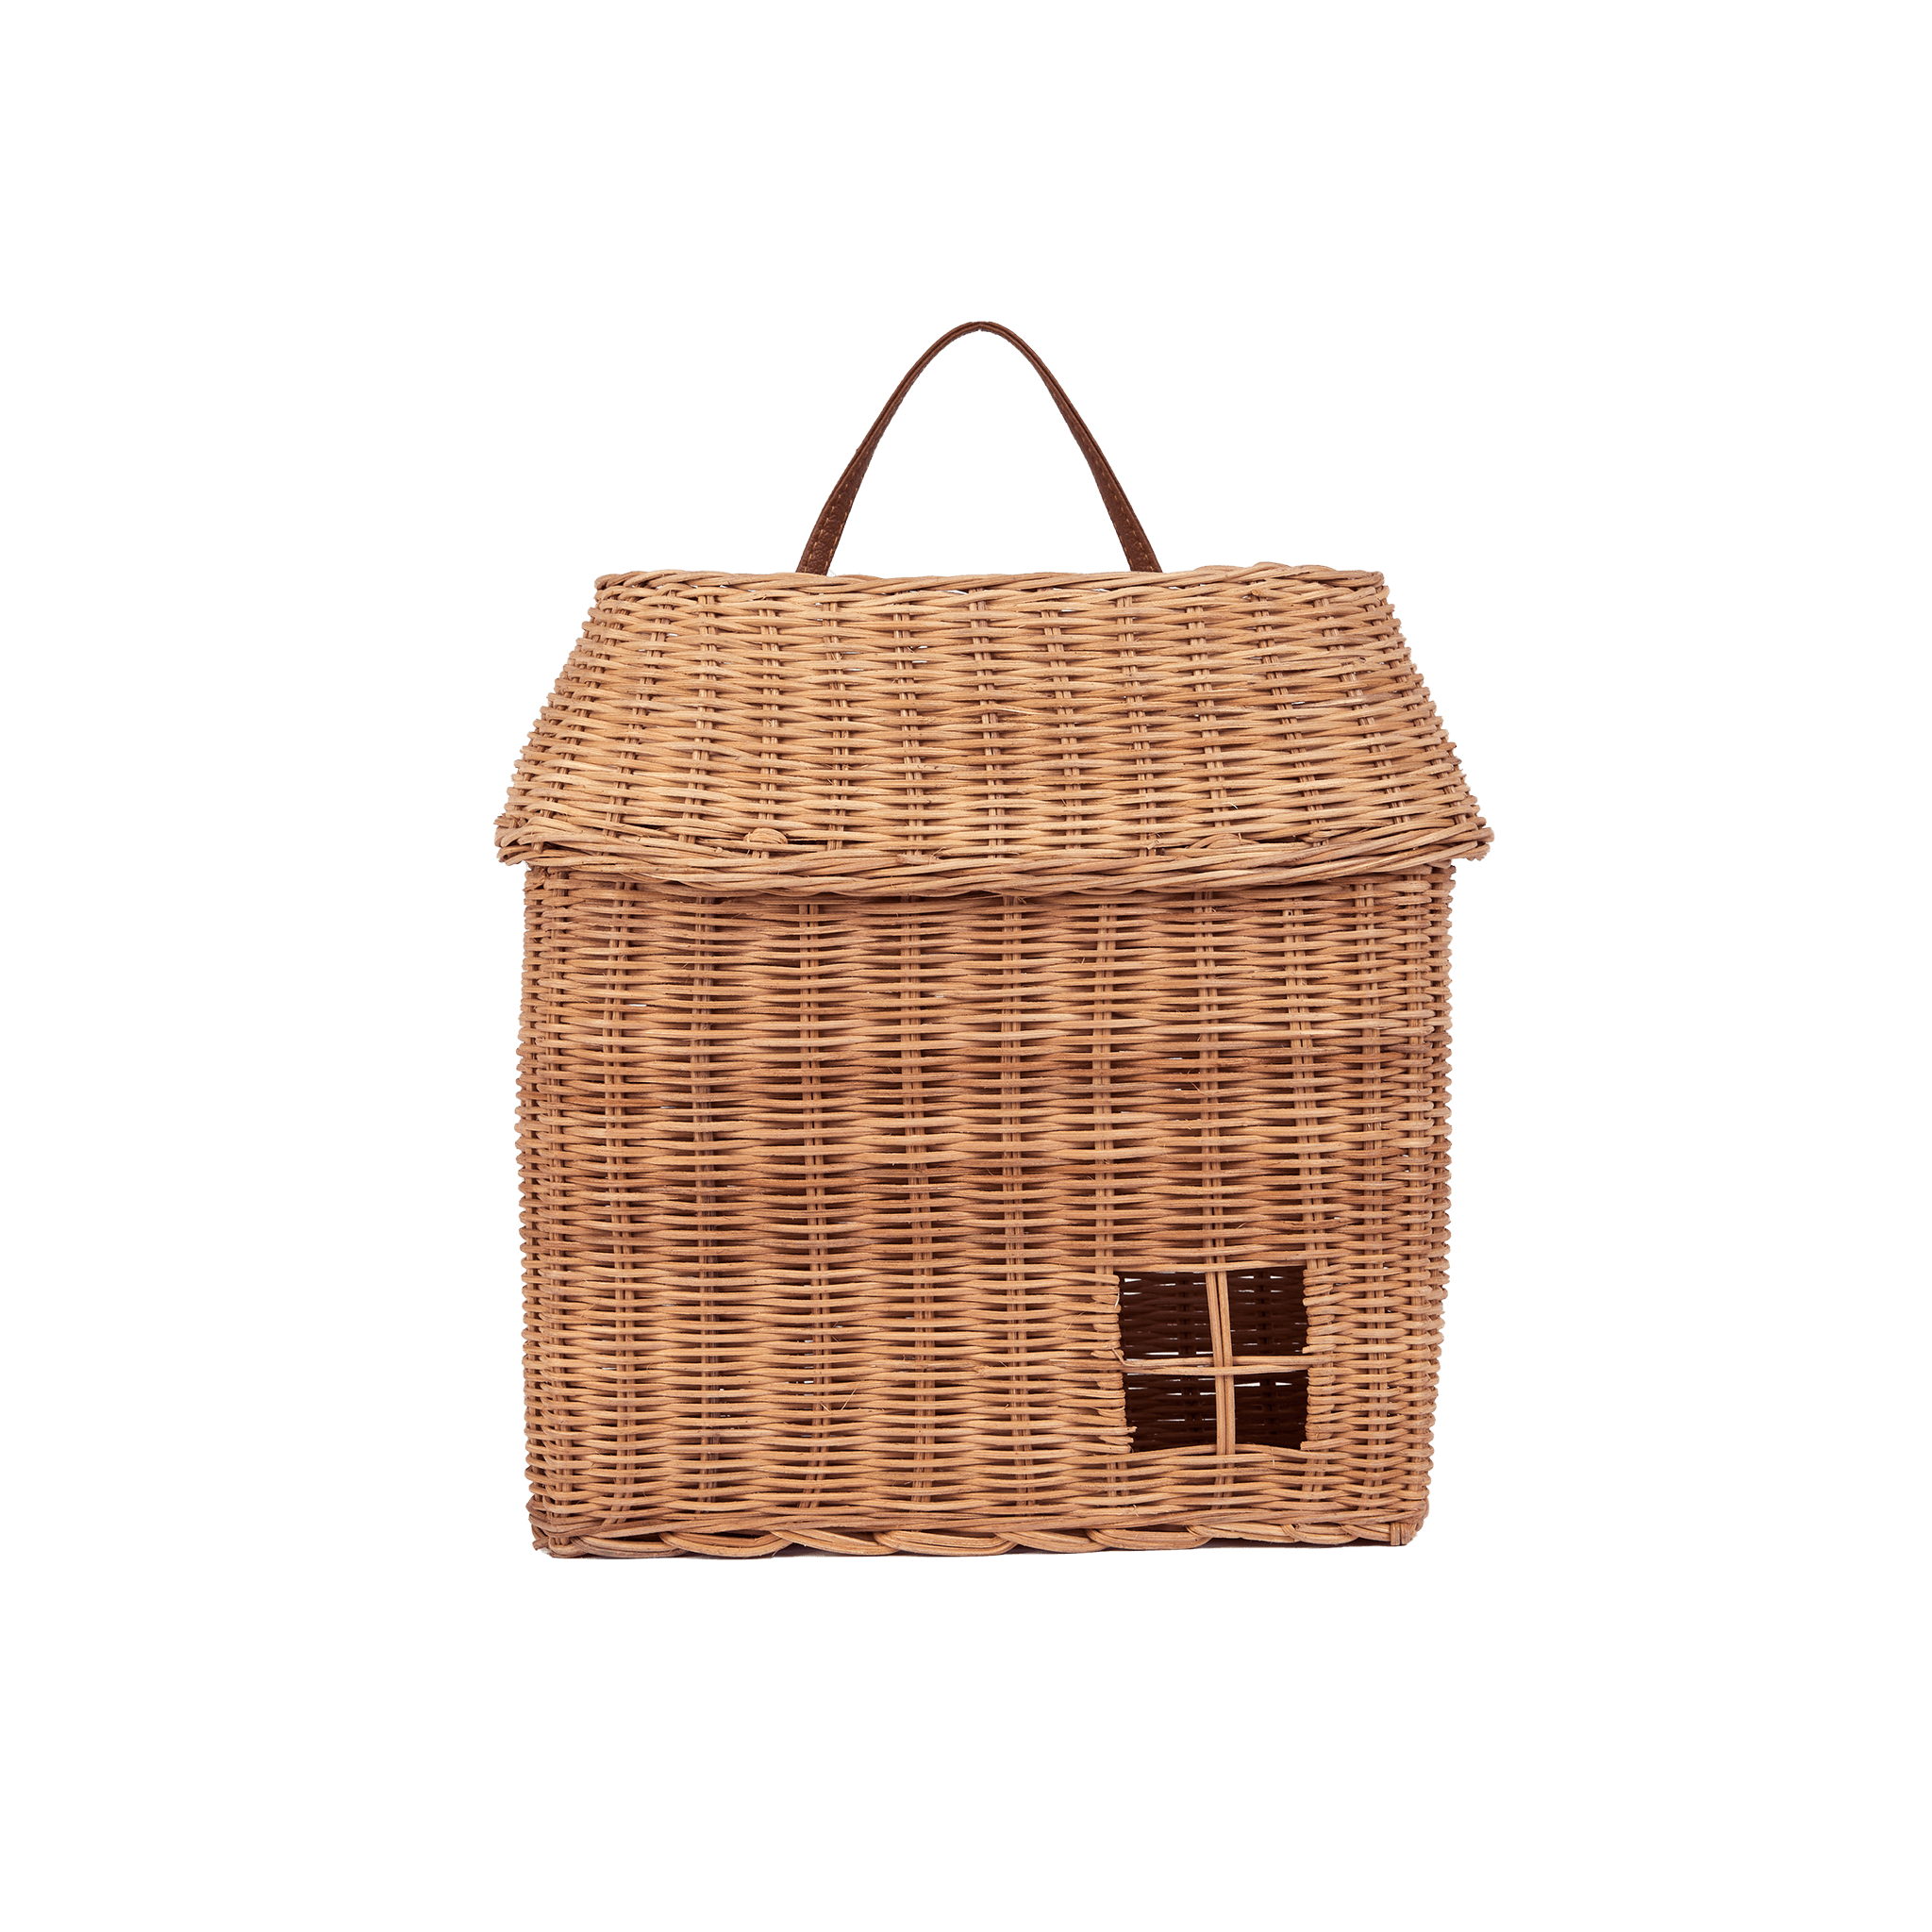 Rattan Hanging Hutch - Why and Whale